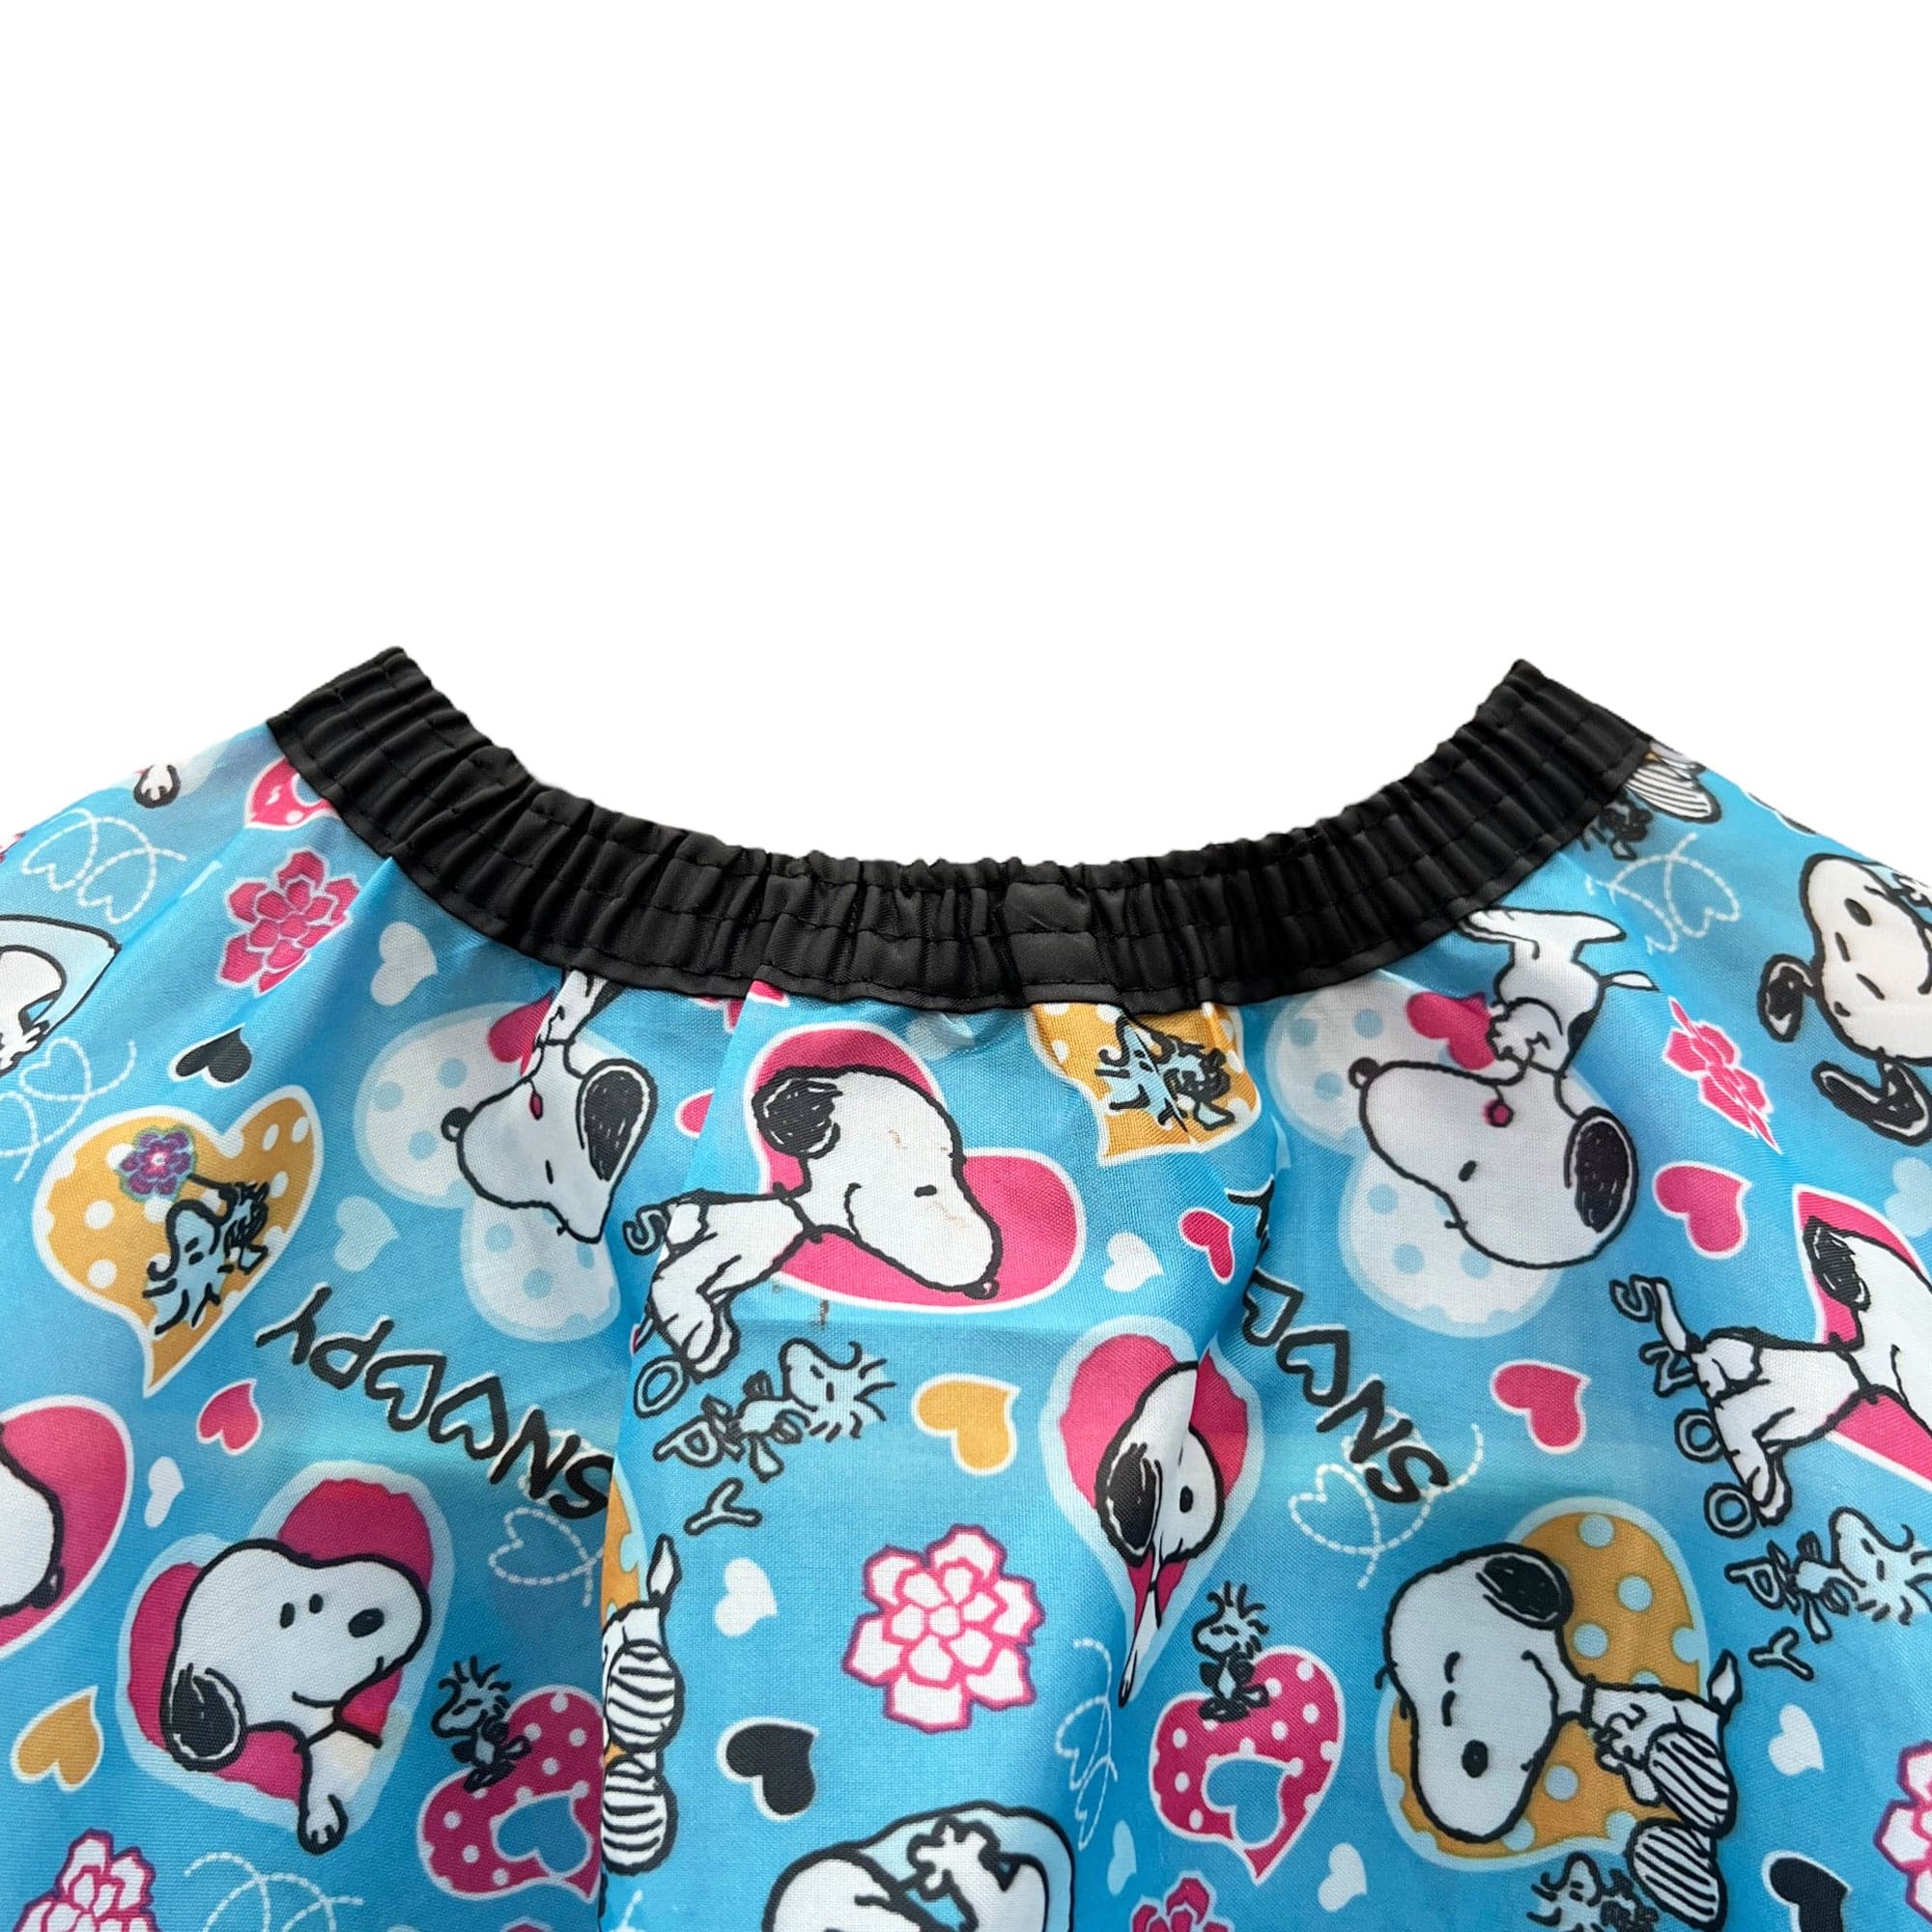 Gabri - Barber Hairdressing Kids Hair Cutting Capes & Gowns Snoopy Pattern